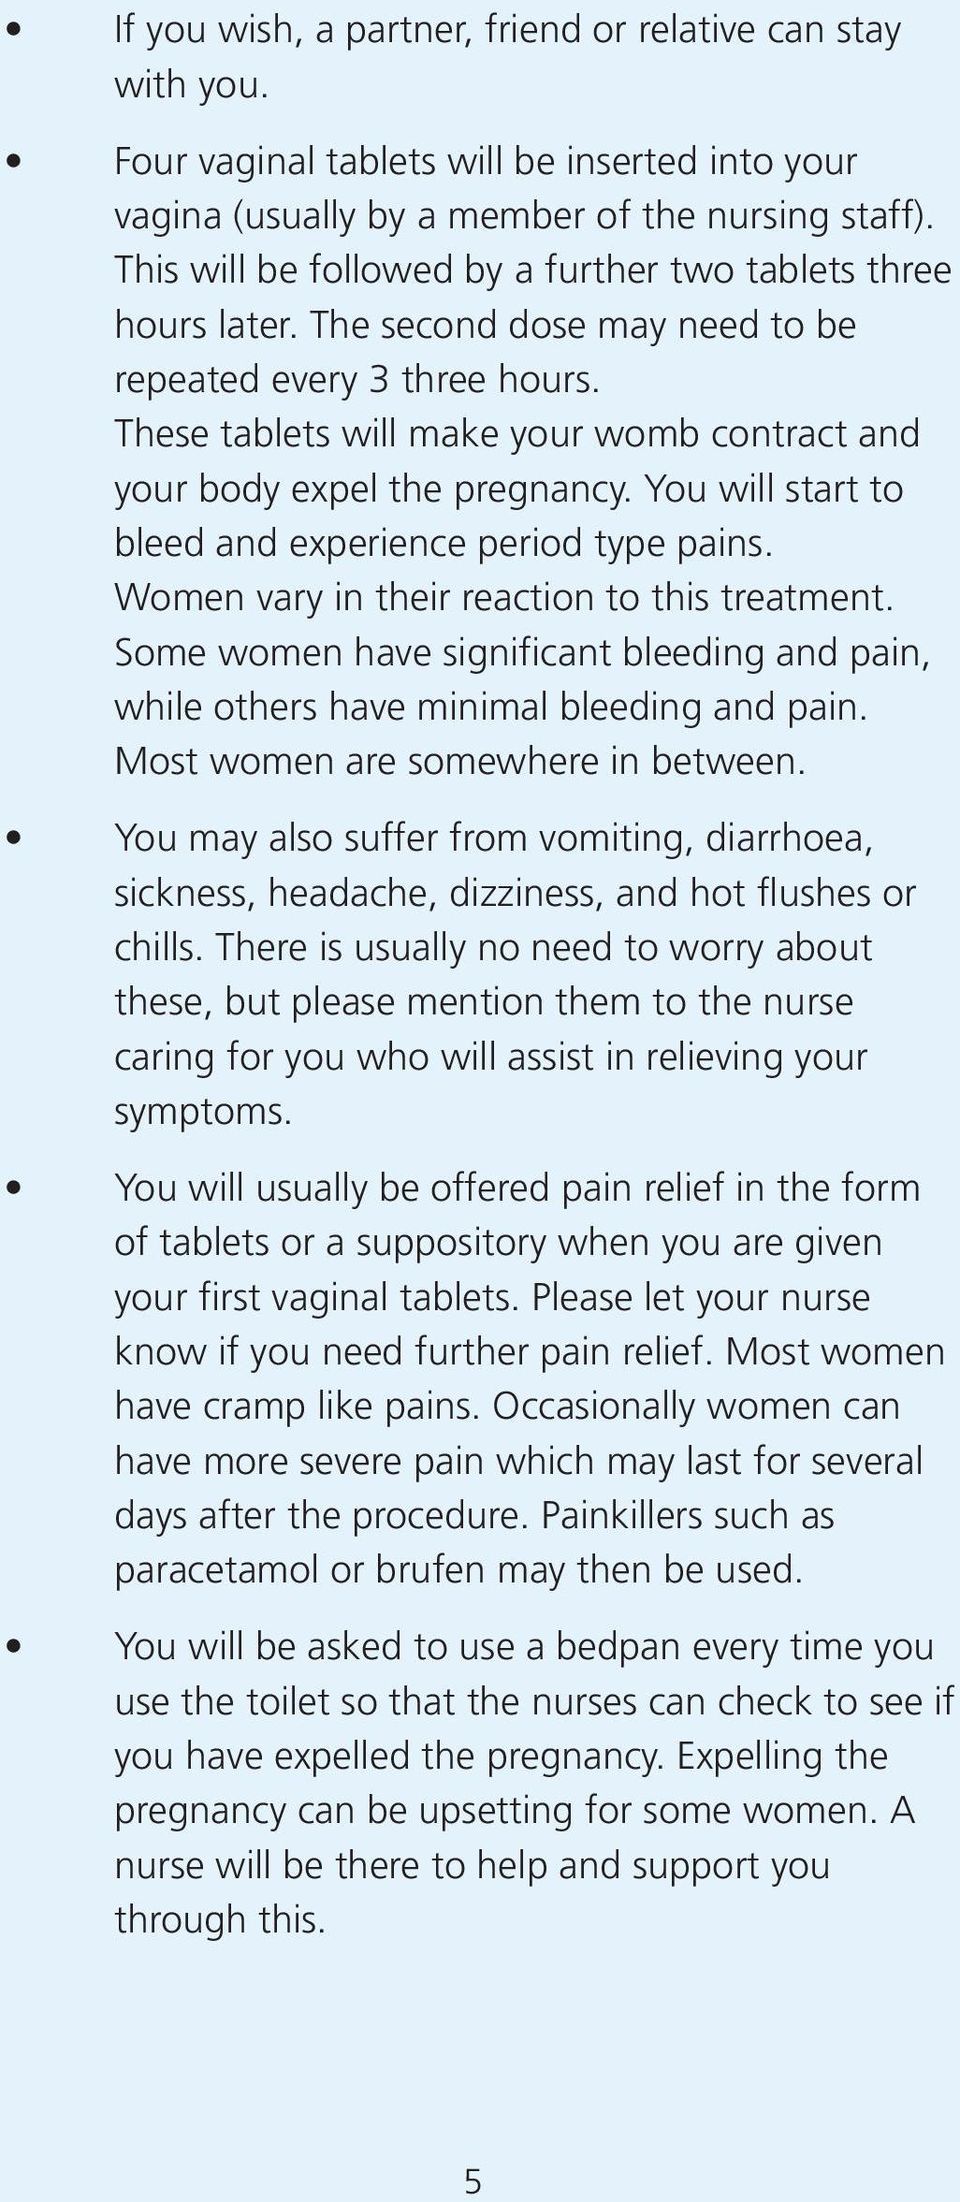 These tablets will make your womb contract and your body expel the pregnancy. You will start to bleed and experience period type pains. Women vary in their reaction to this treatment.